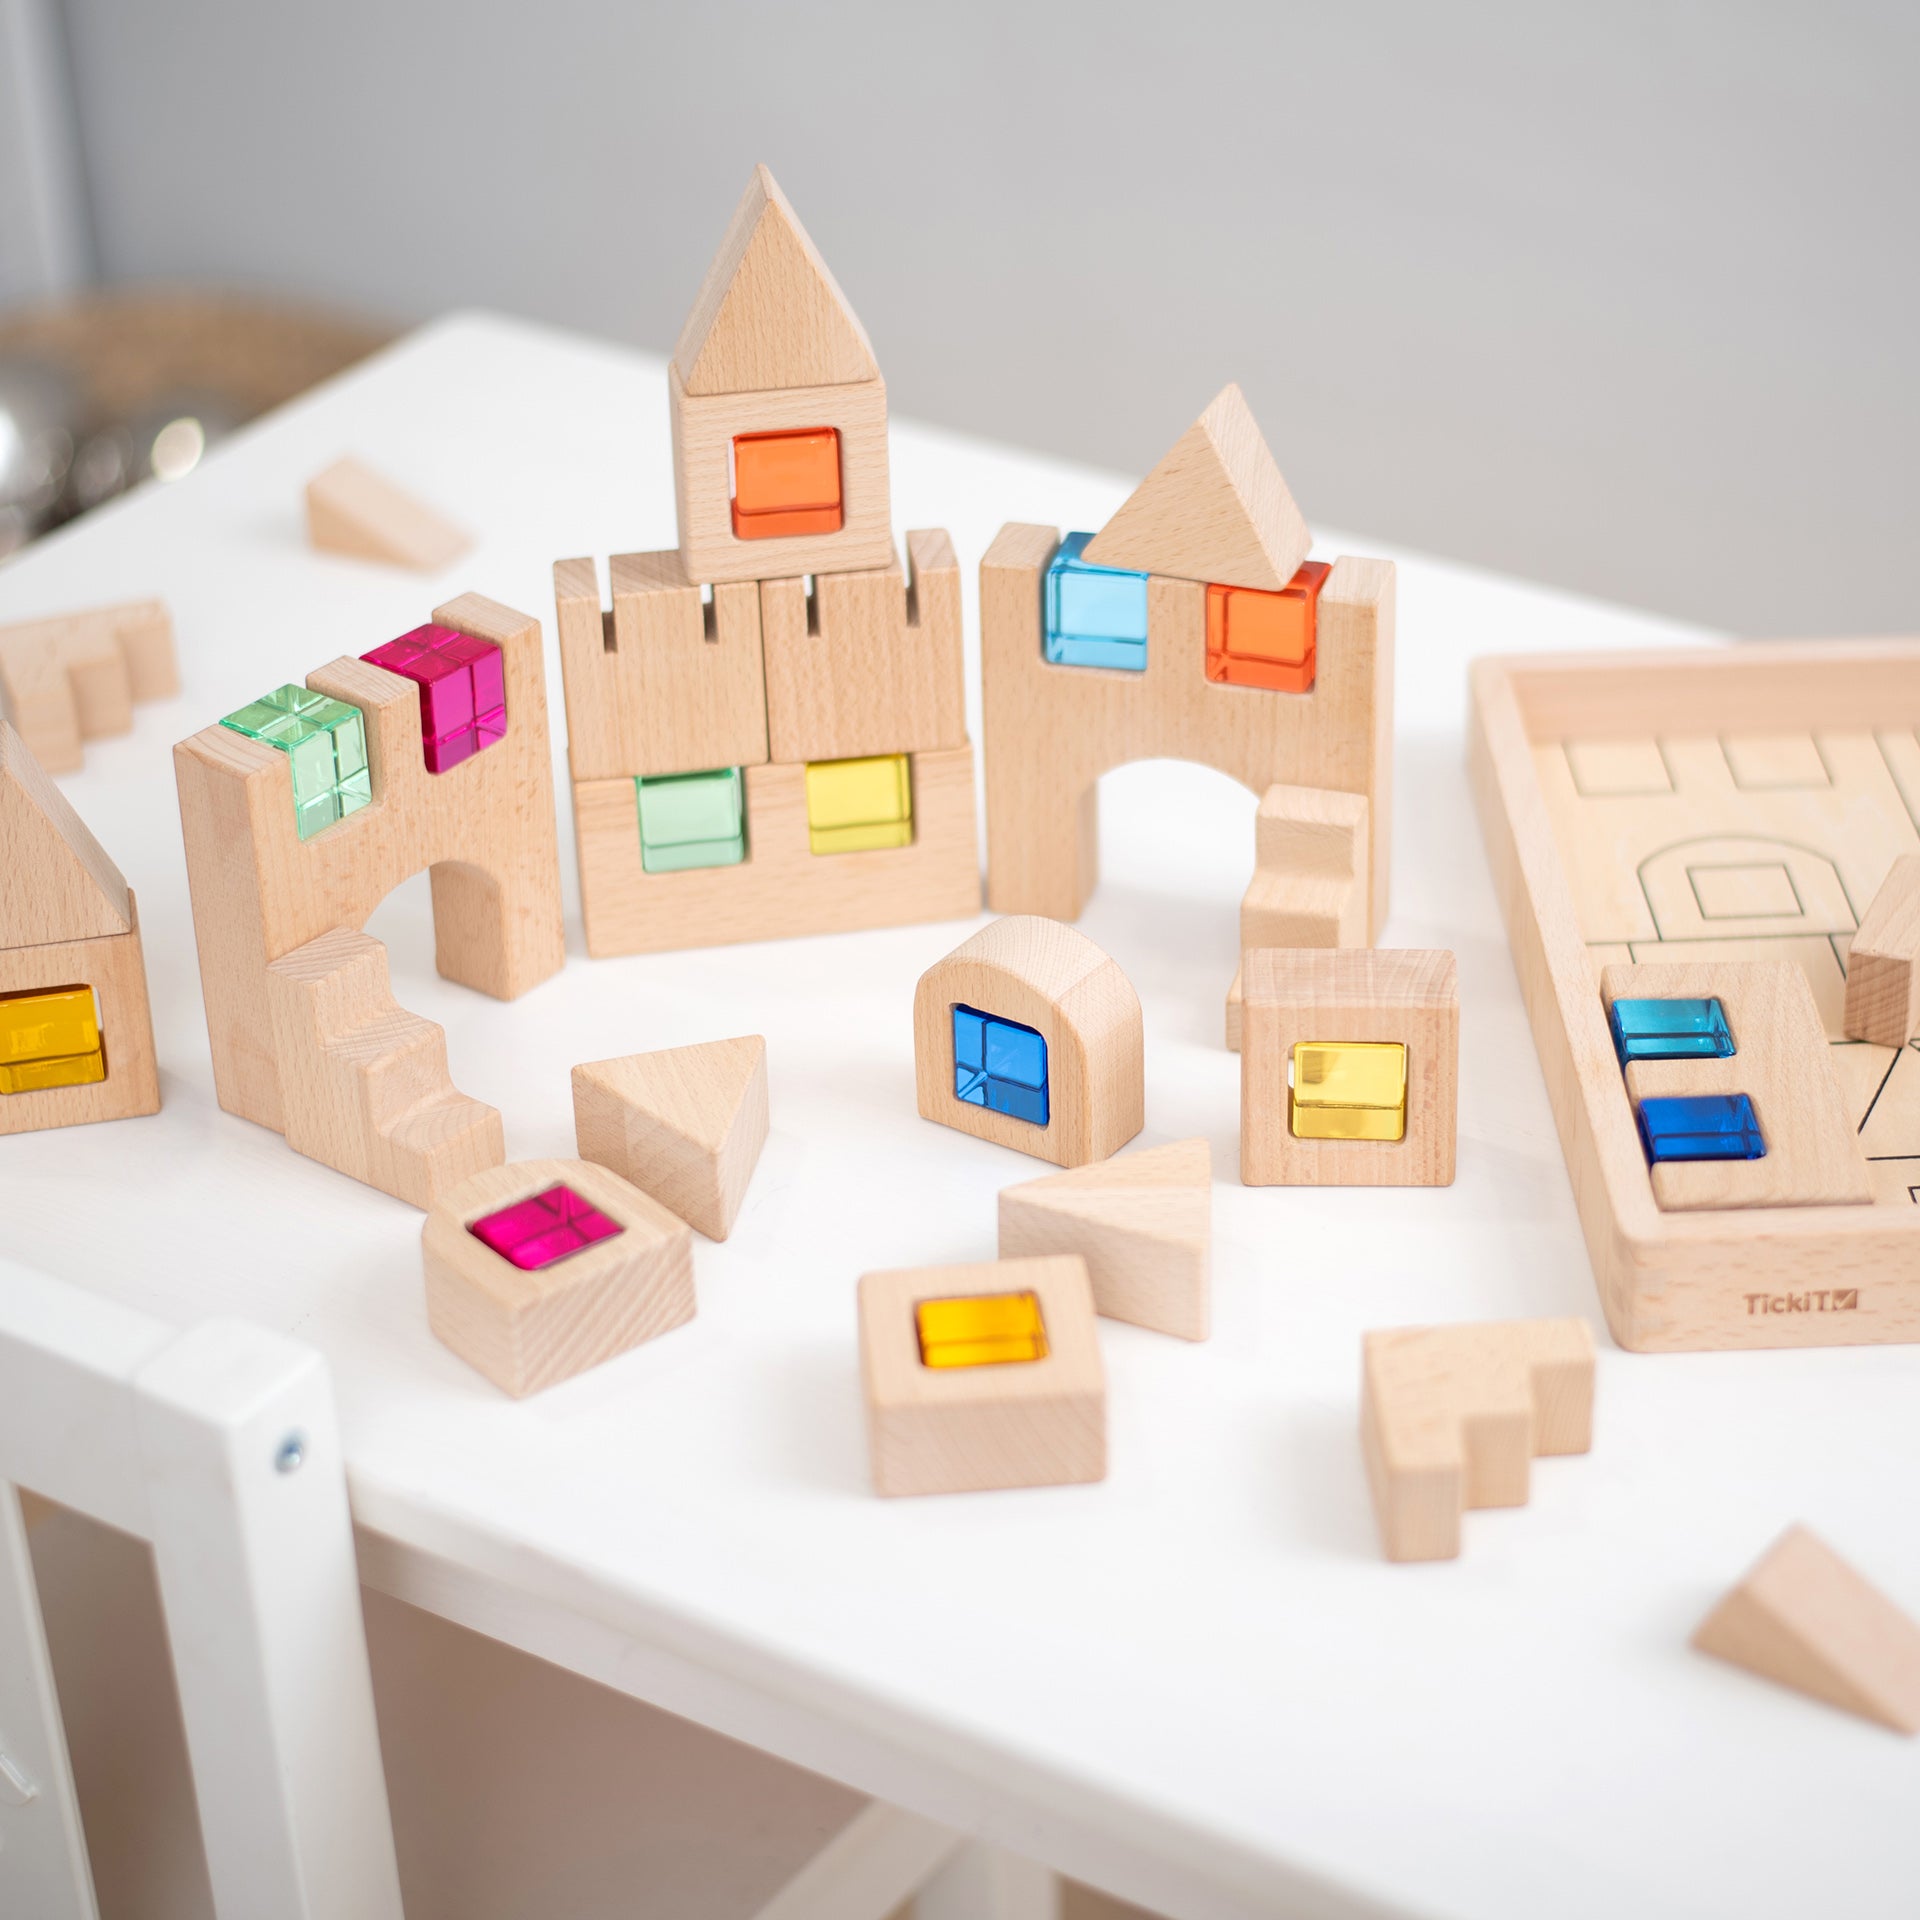 TickiT Wooden Building Gem Blocks, Creatively designed, our TickiT® Wooden Building Gem Blocks will encourage your child to use their limitless imagination, construct exciting structures, and learn through play! The smooth natural wooden blocks with crystal gem cube inserts give bursts of captivating colour, sparking your child's curiosity. The blocks are tactile and offer an open-ended approach for your child to have the freedom to use them however they choose. Older children can use their advanced creativ